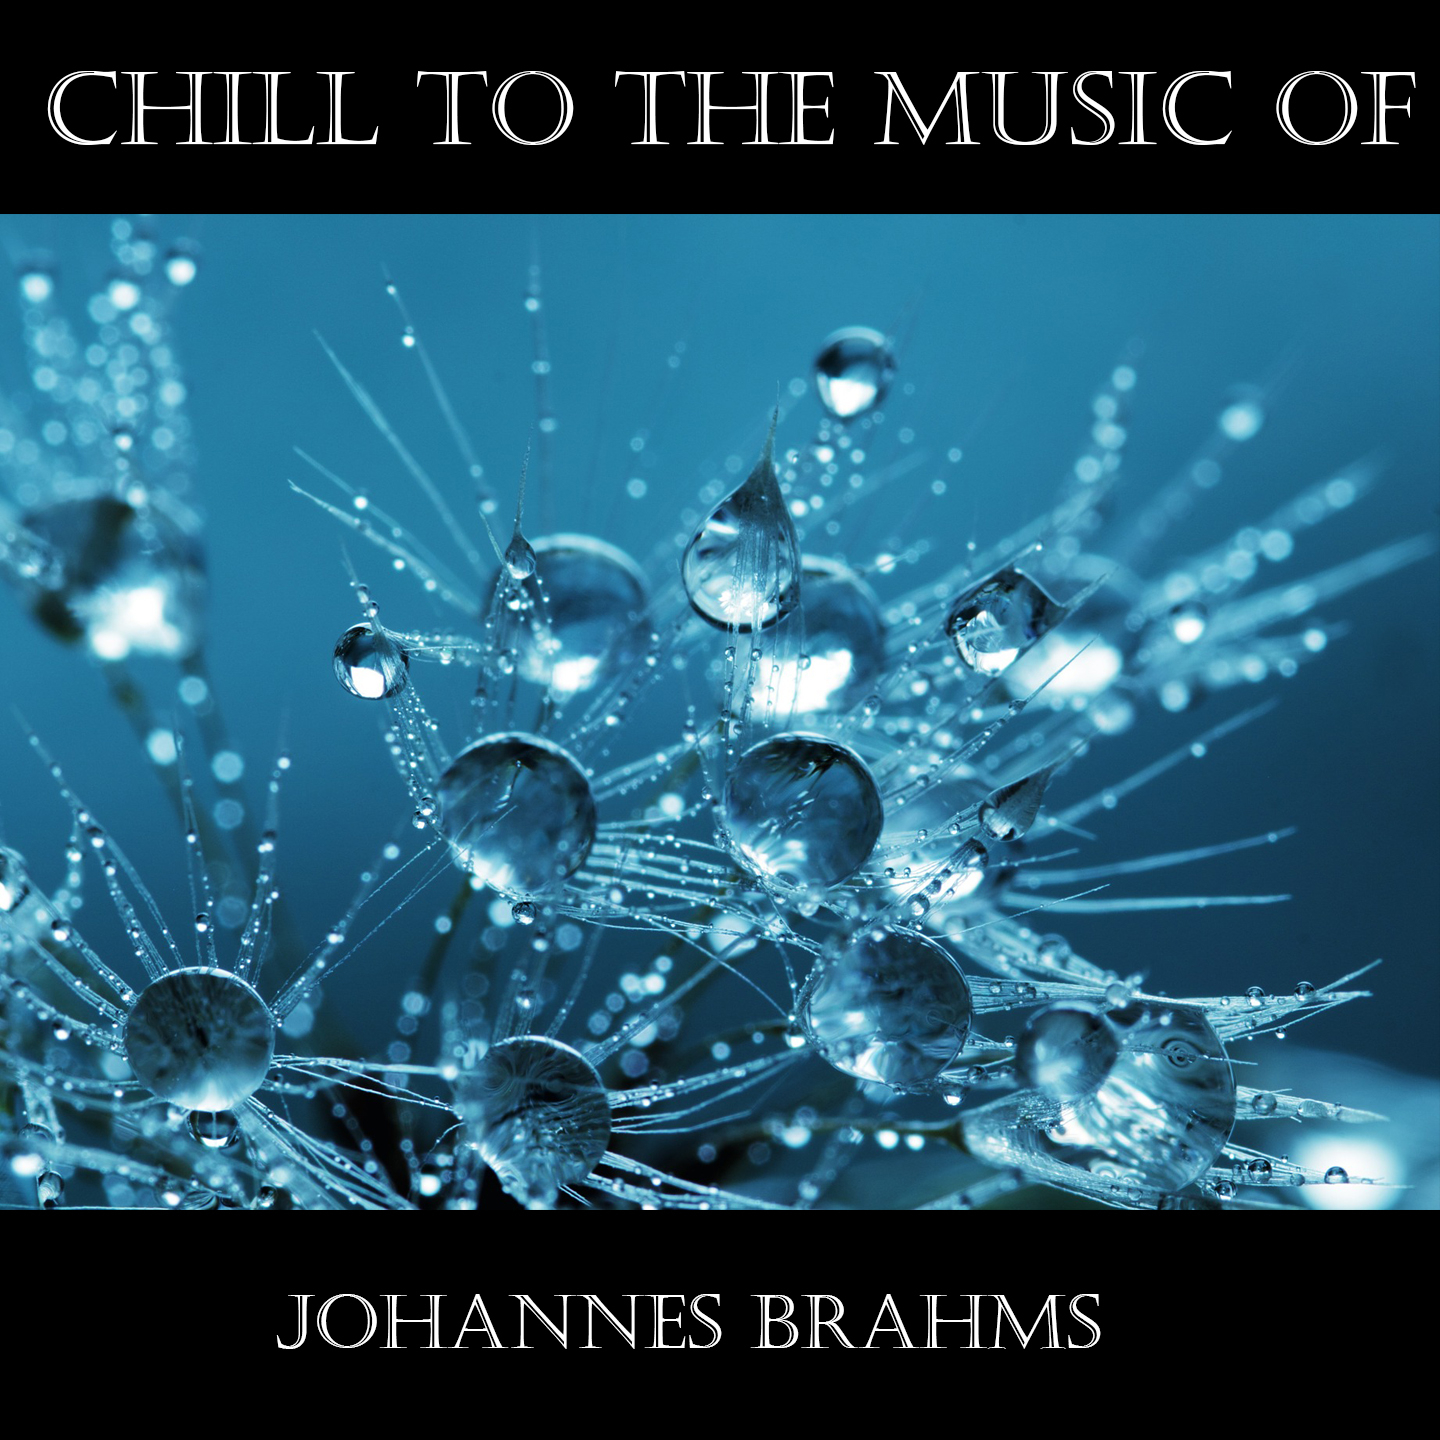 Chill To The Music Of Johannes Brahms